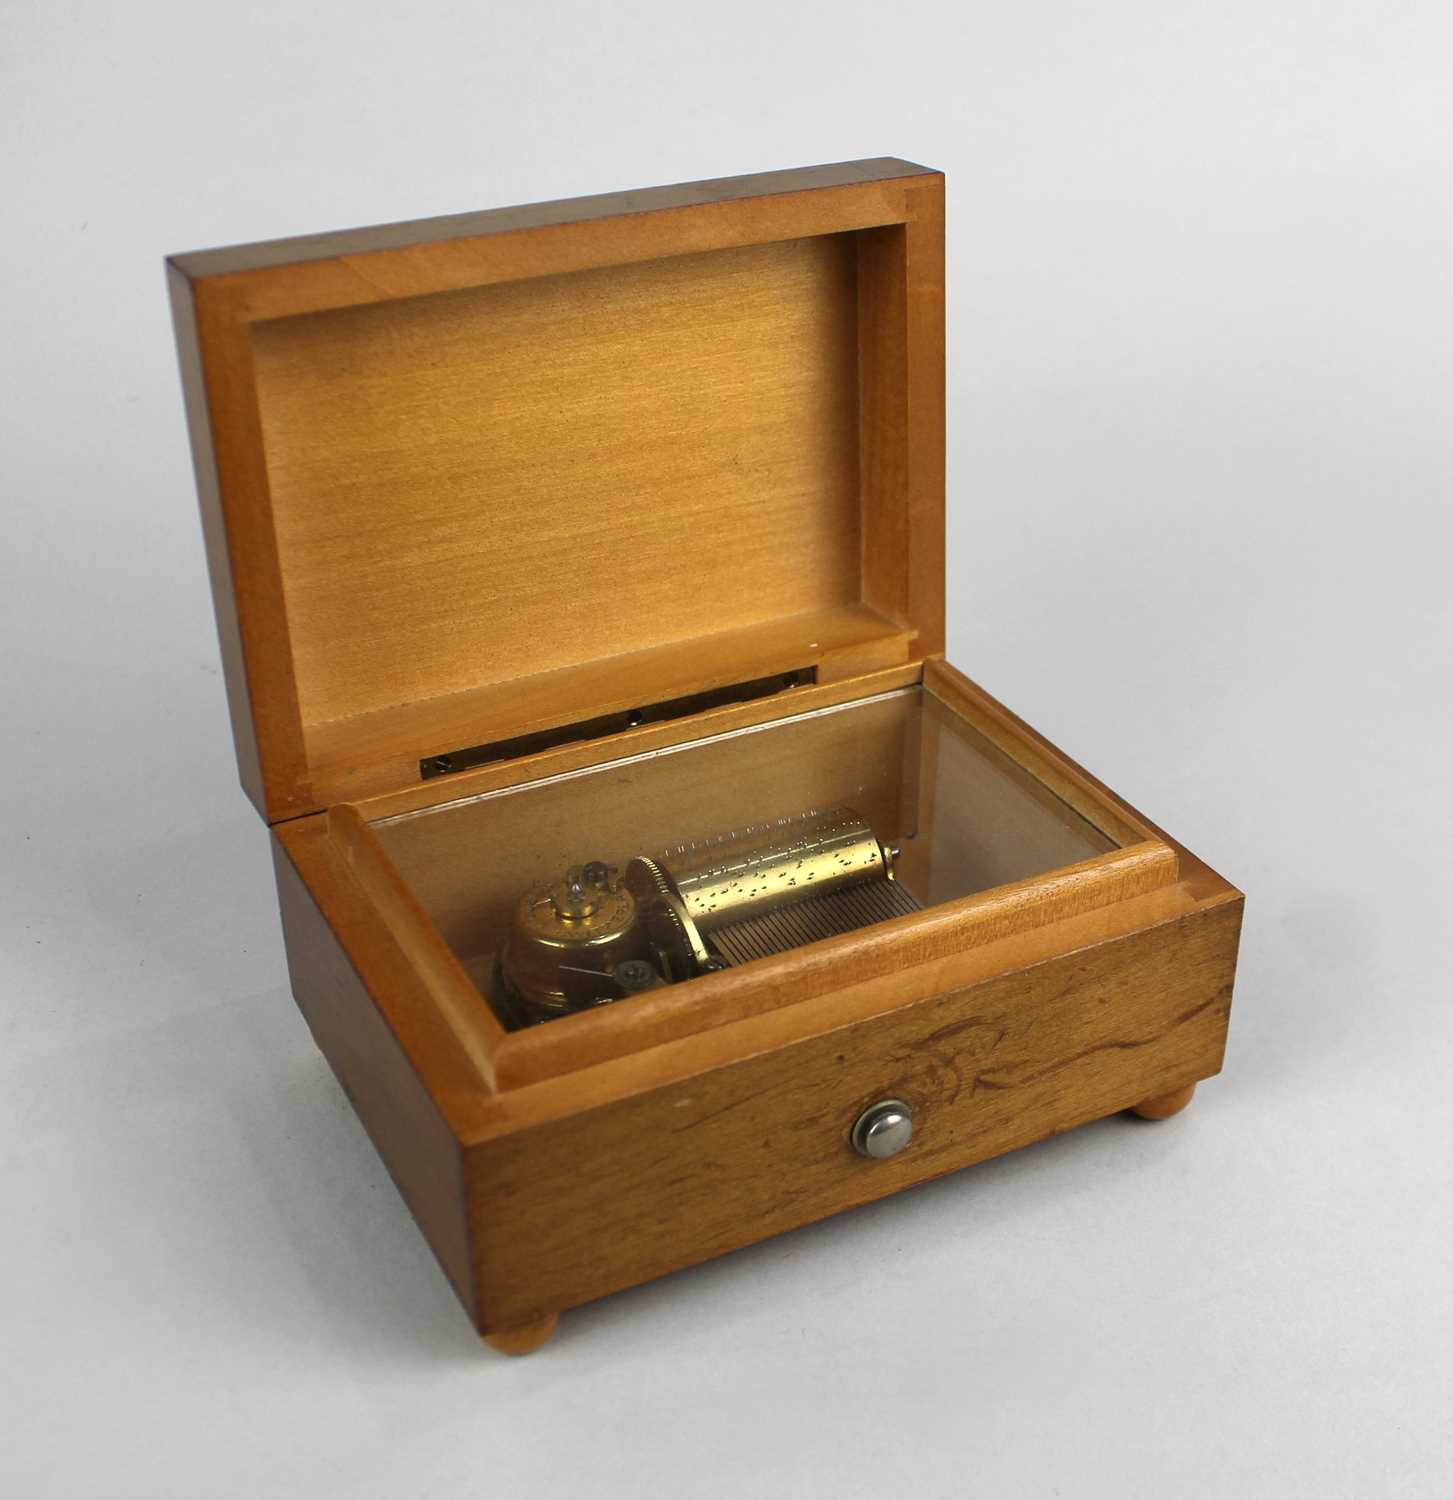 A Swiss small music box in plain rectangular wooden case with slide button switch, label beneath '